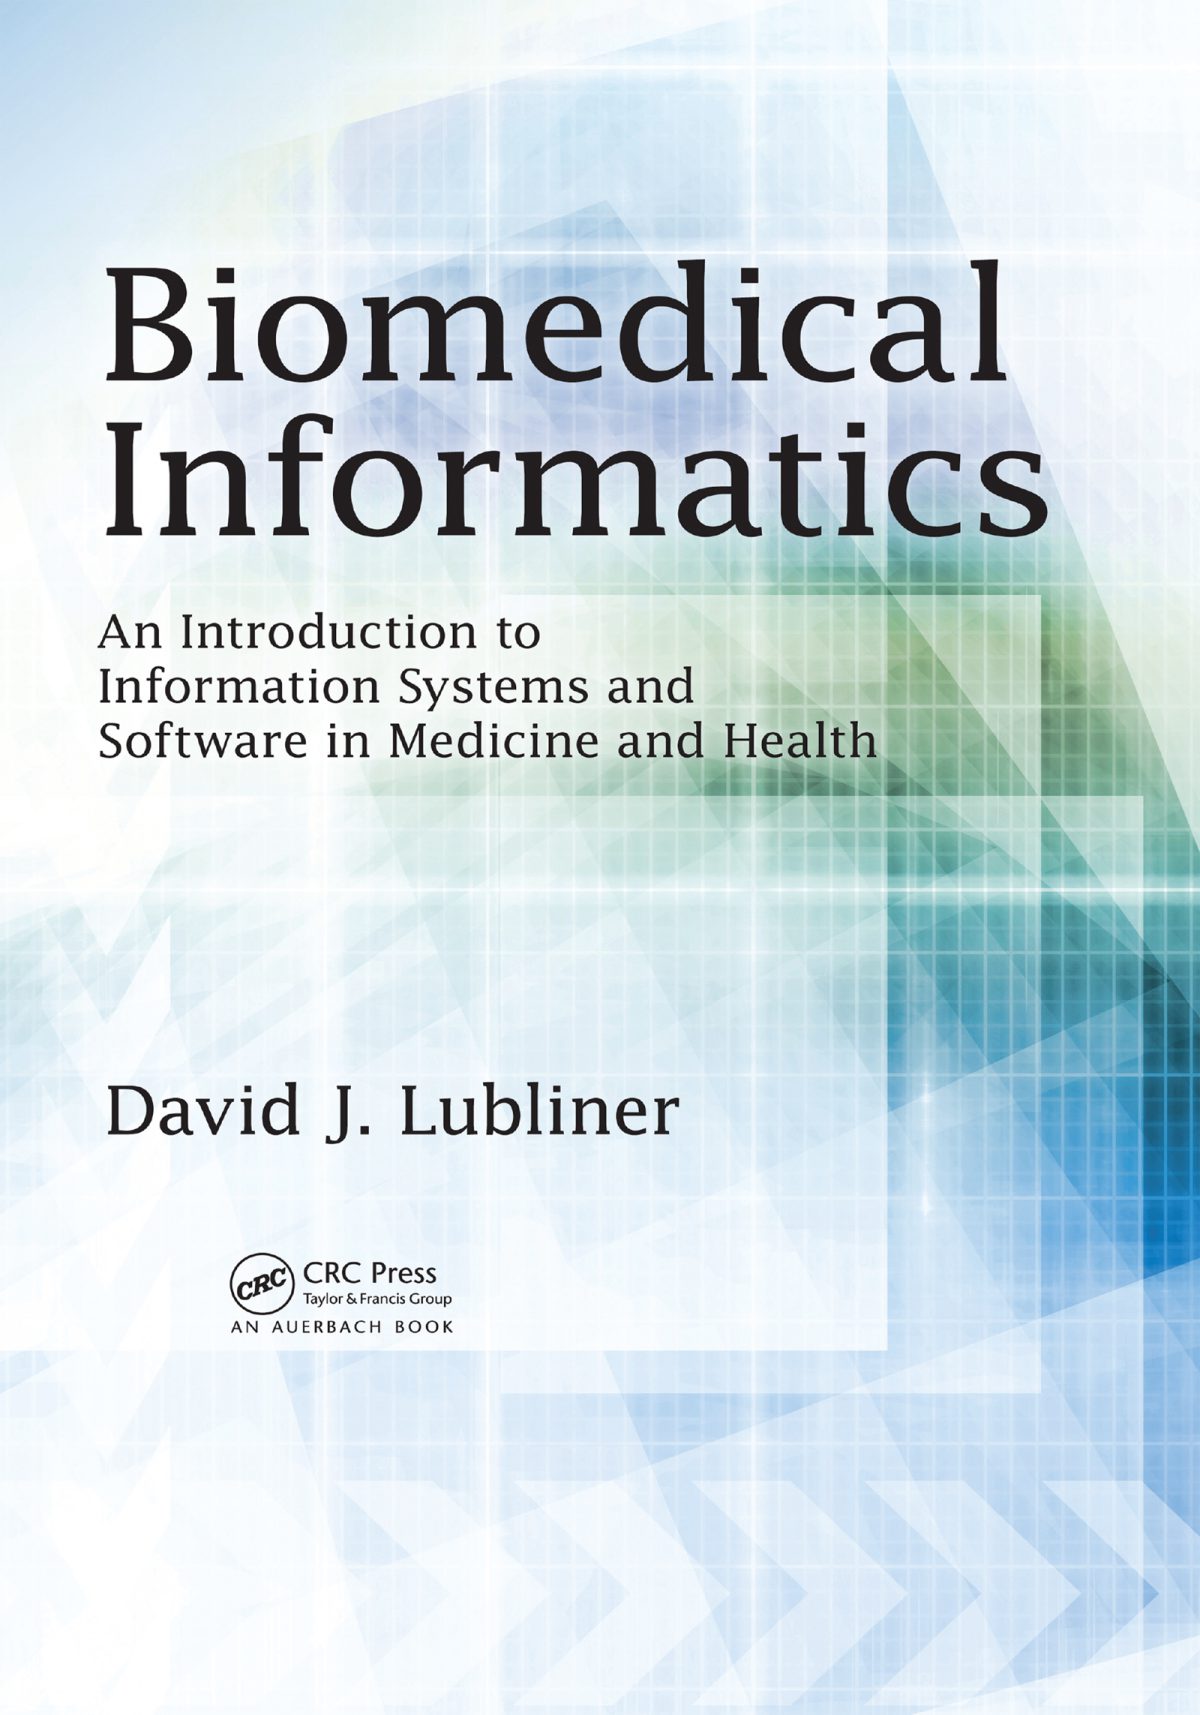 Biomedical Informatics: An Introduction to Information Systems and Software in Medicine and Health 2015